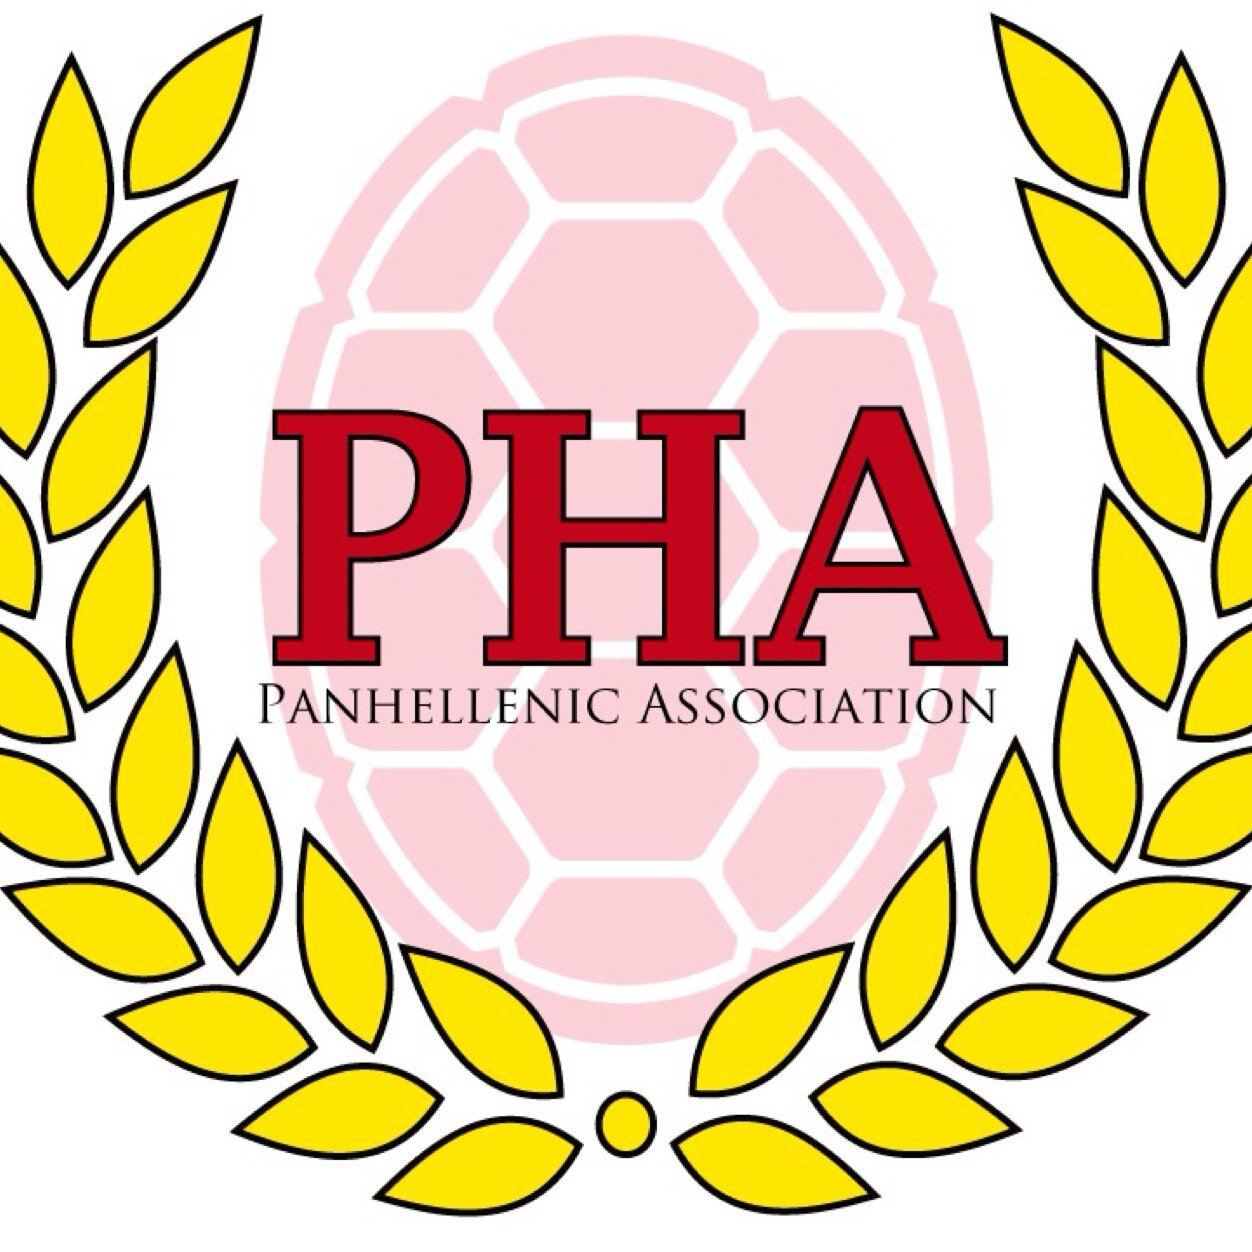 The Panhellenic Association is the governing council of the 16 NPC sororities at the University of Maryland. Instagram: @UMDPHA